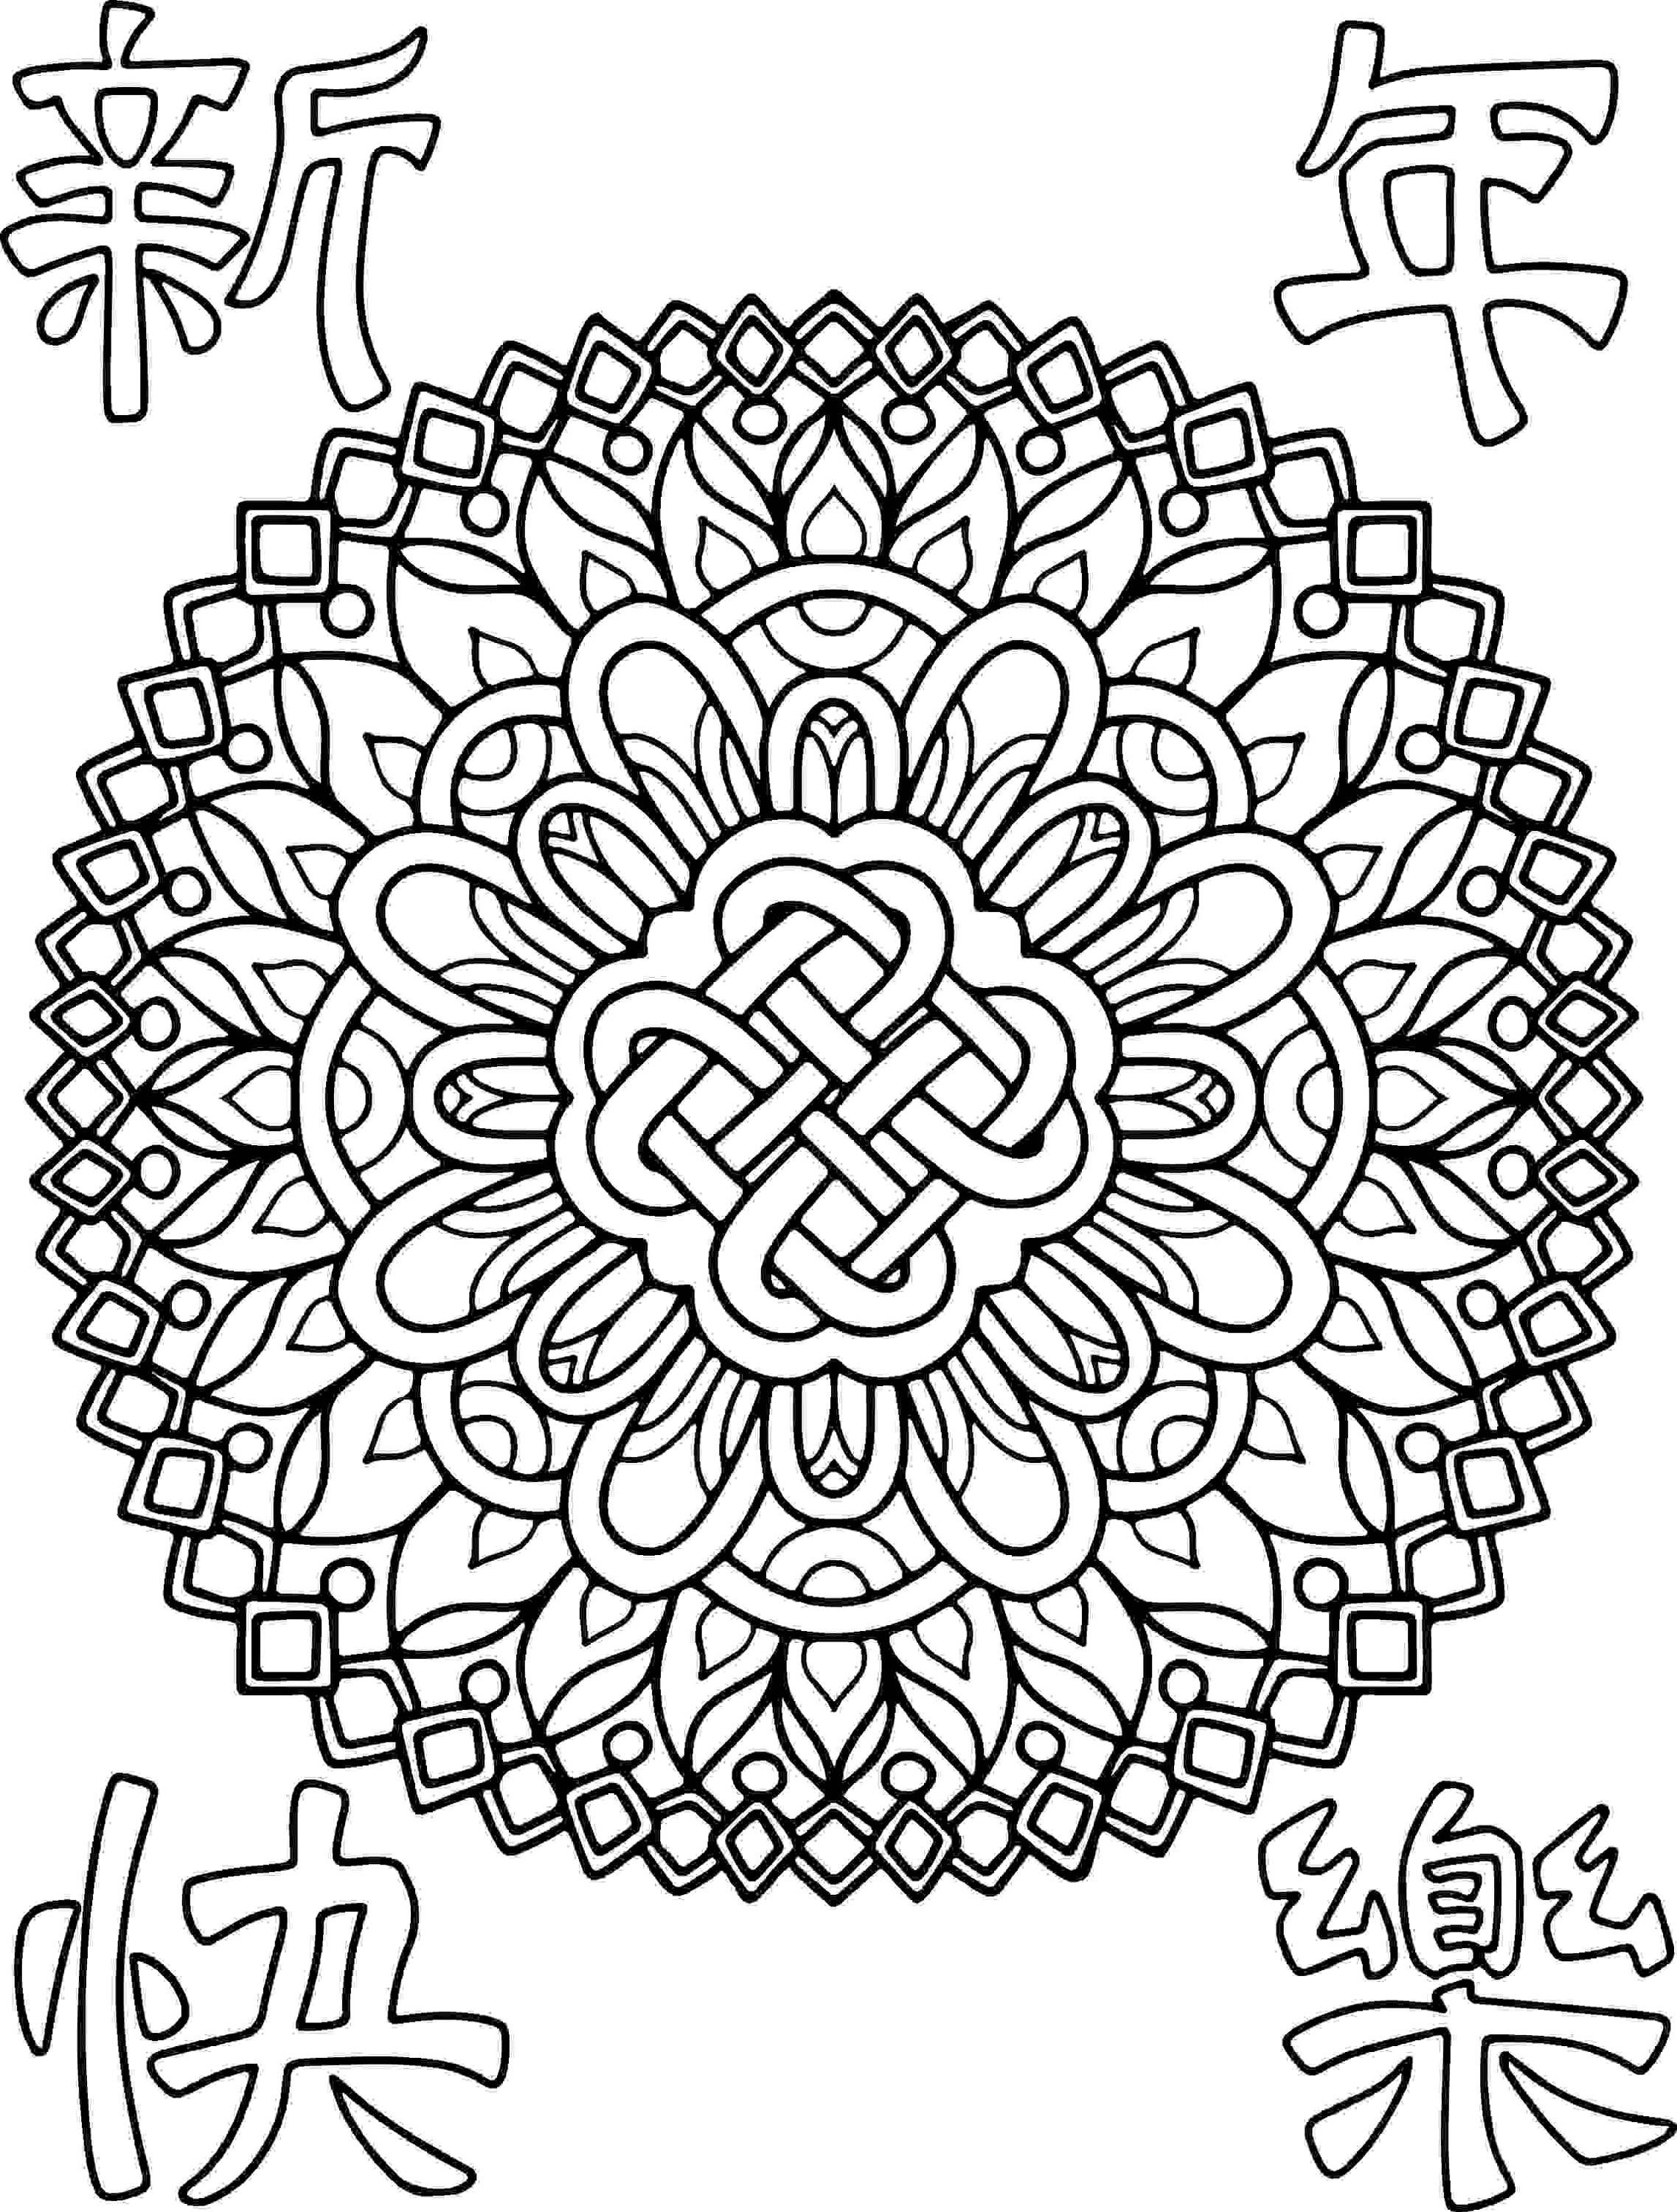 Coloring Pages Of Crosses With Flowers Coloring Pages Printable Mandala Designs Crosses And Flowers